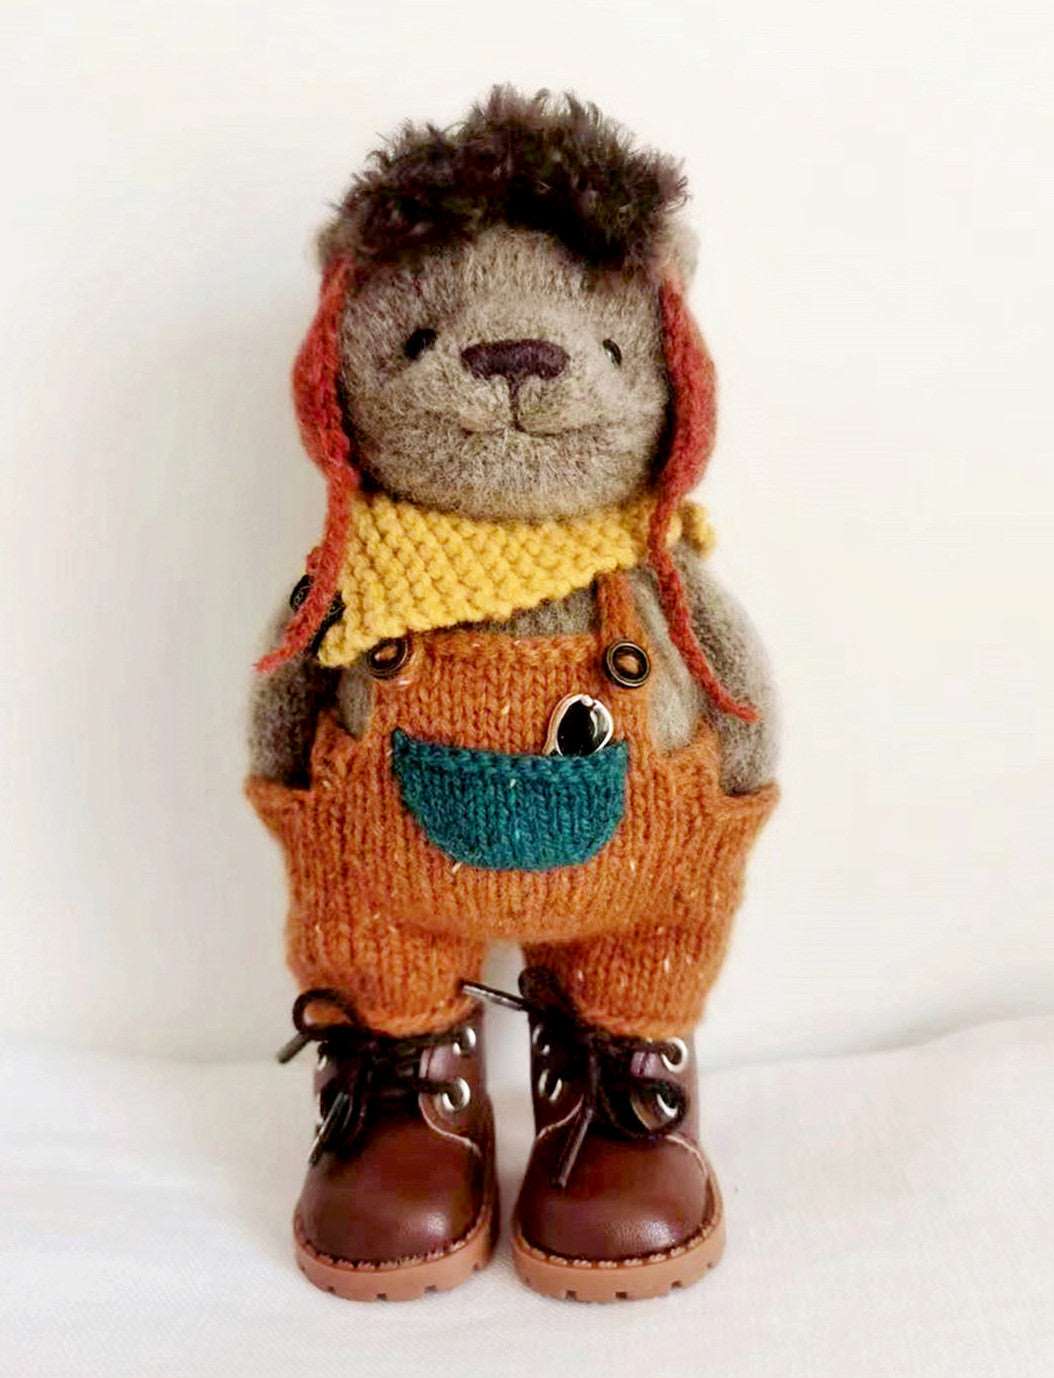 Unique Handmade Crochet Teddy Bear Toy for Gifts